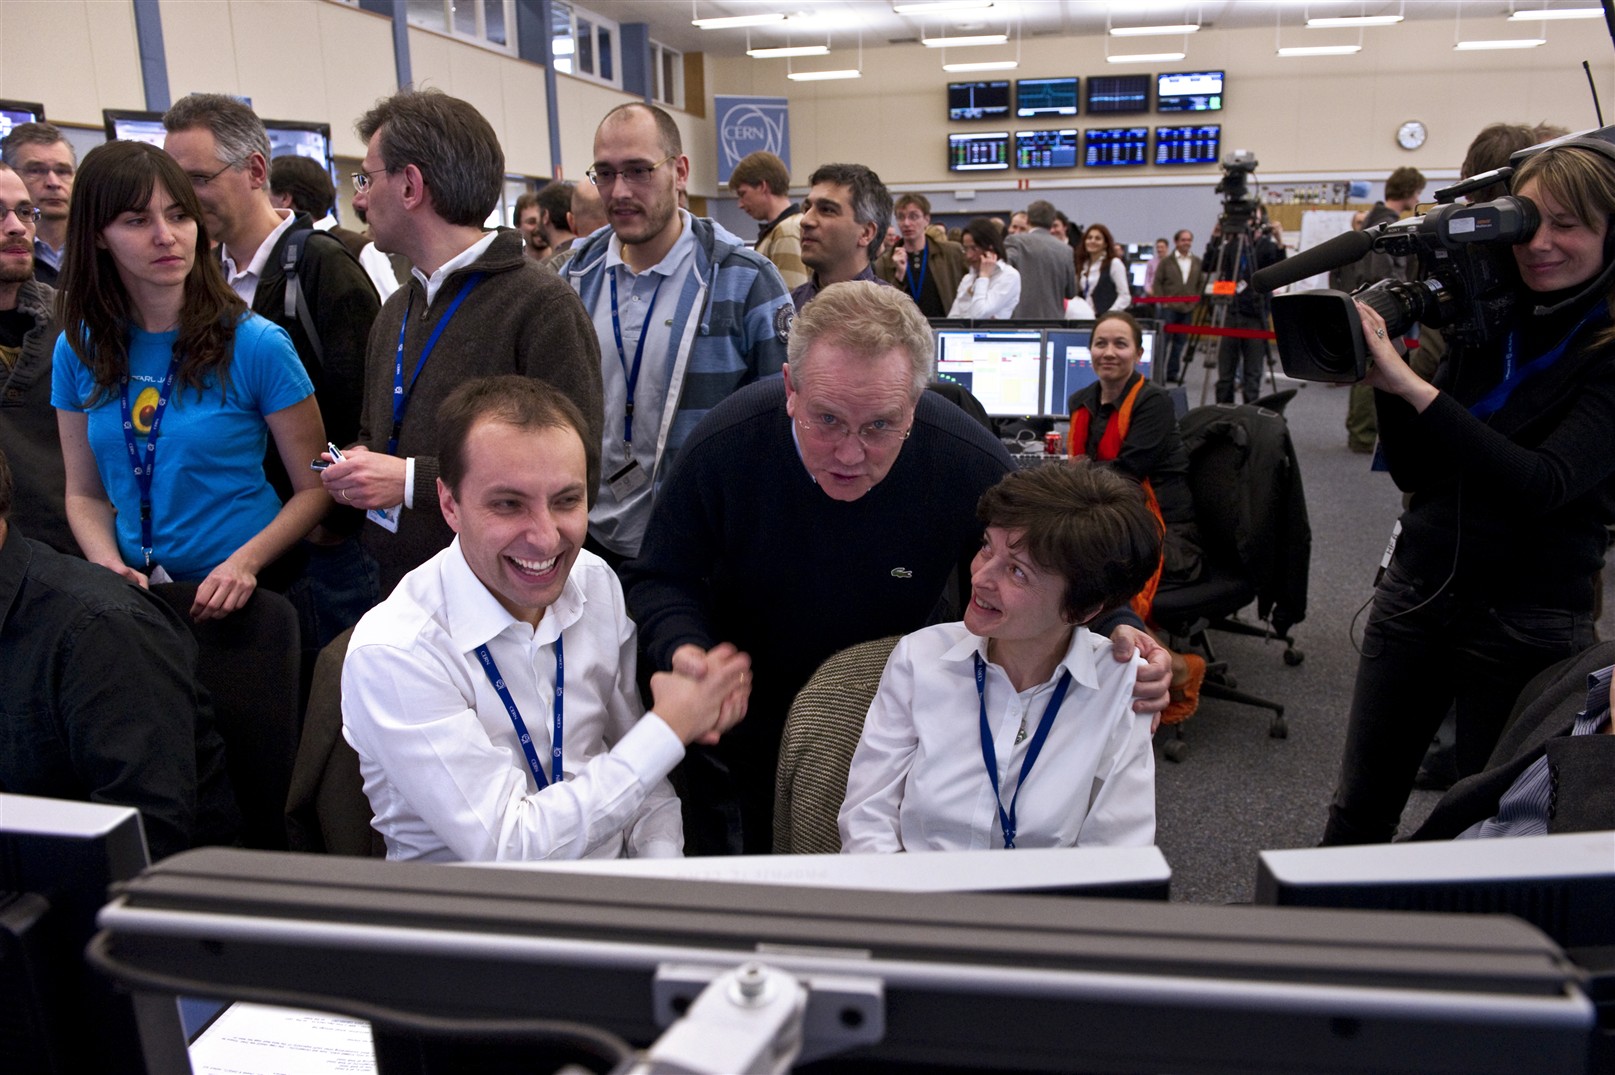 Steve Myers, CERN Director of Accelerators and Technology, congratulates the LHC operators after the first high-energy collisions in the LHC.